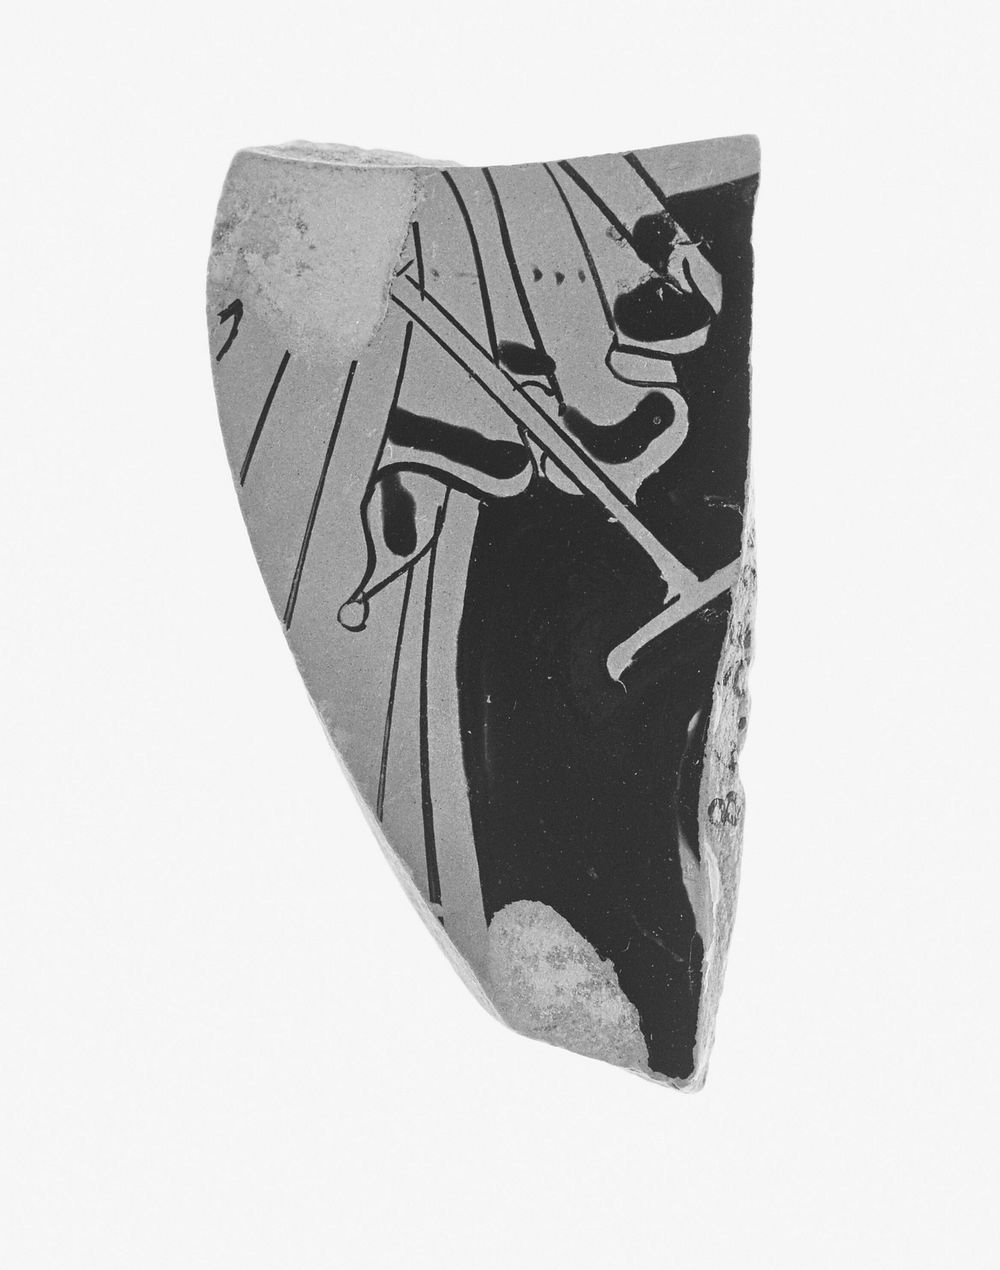 Attic Red-Figure Cup Fragment by Brygos Painter